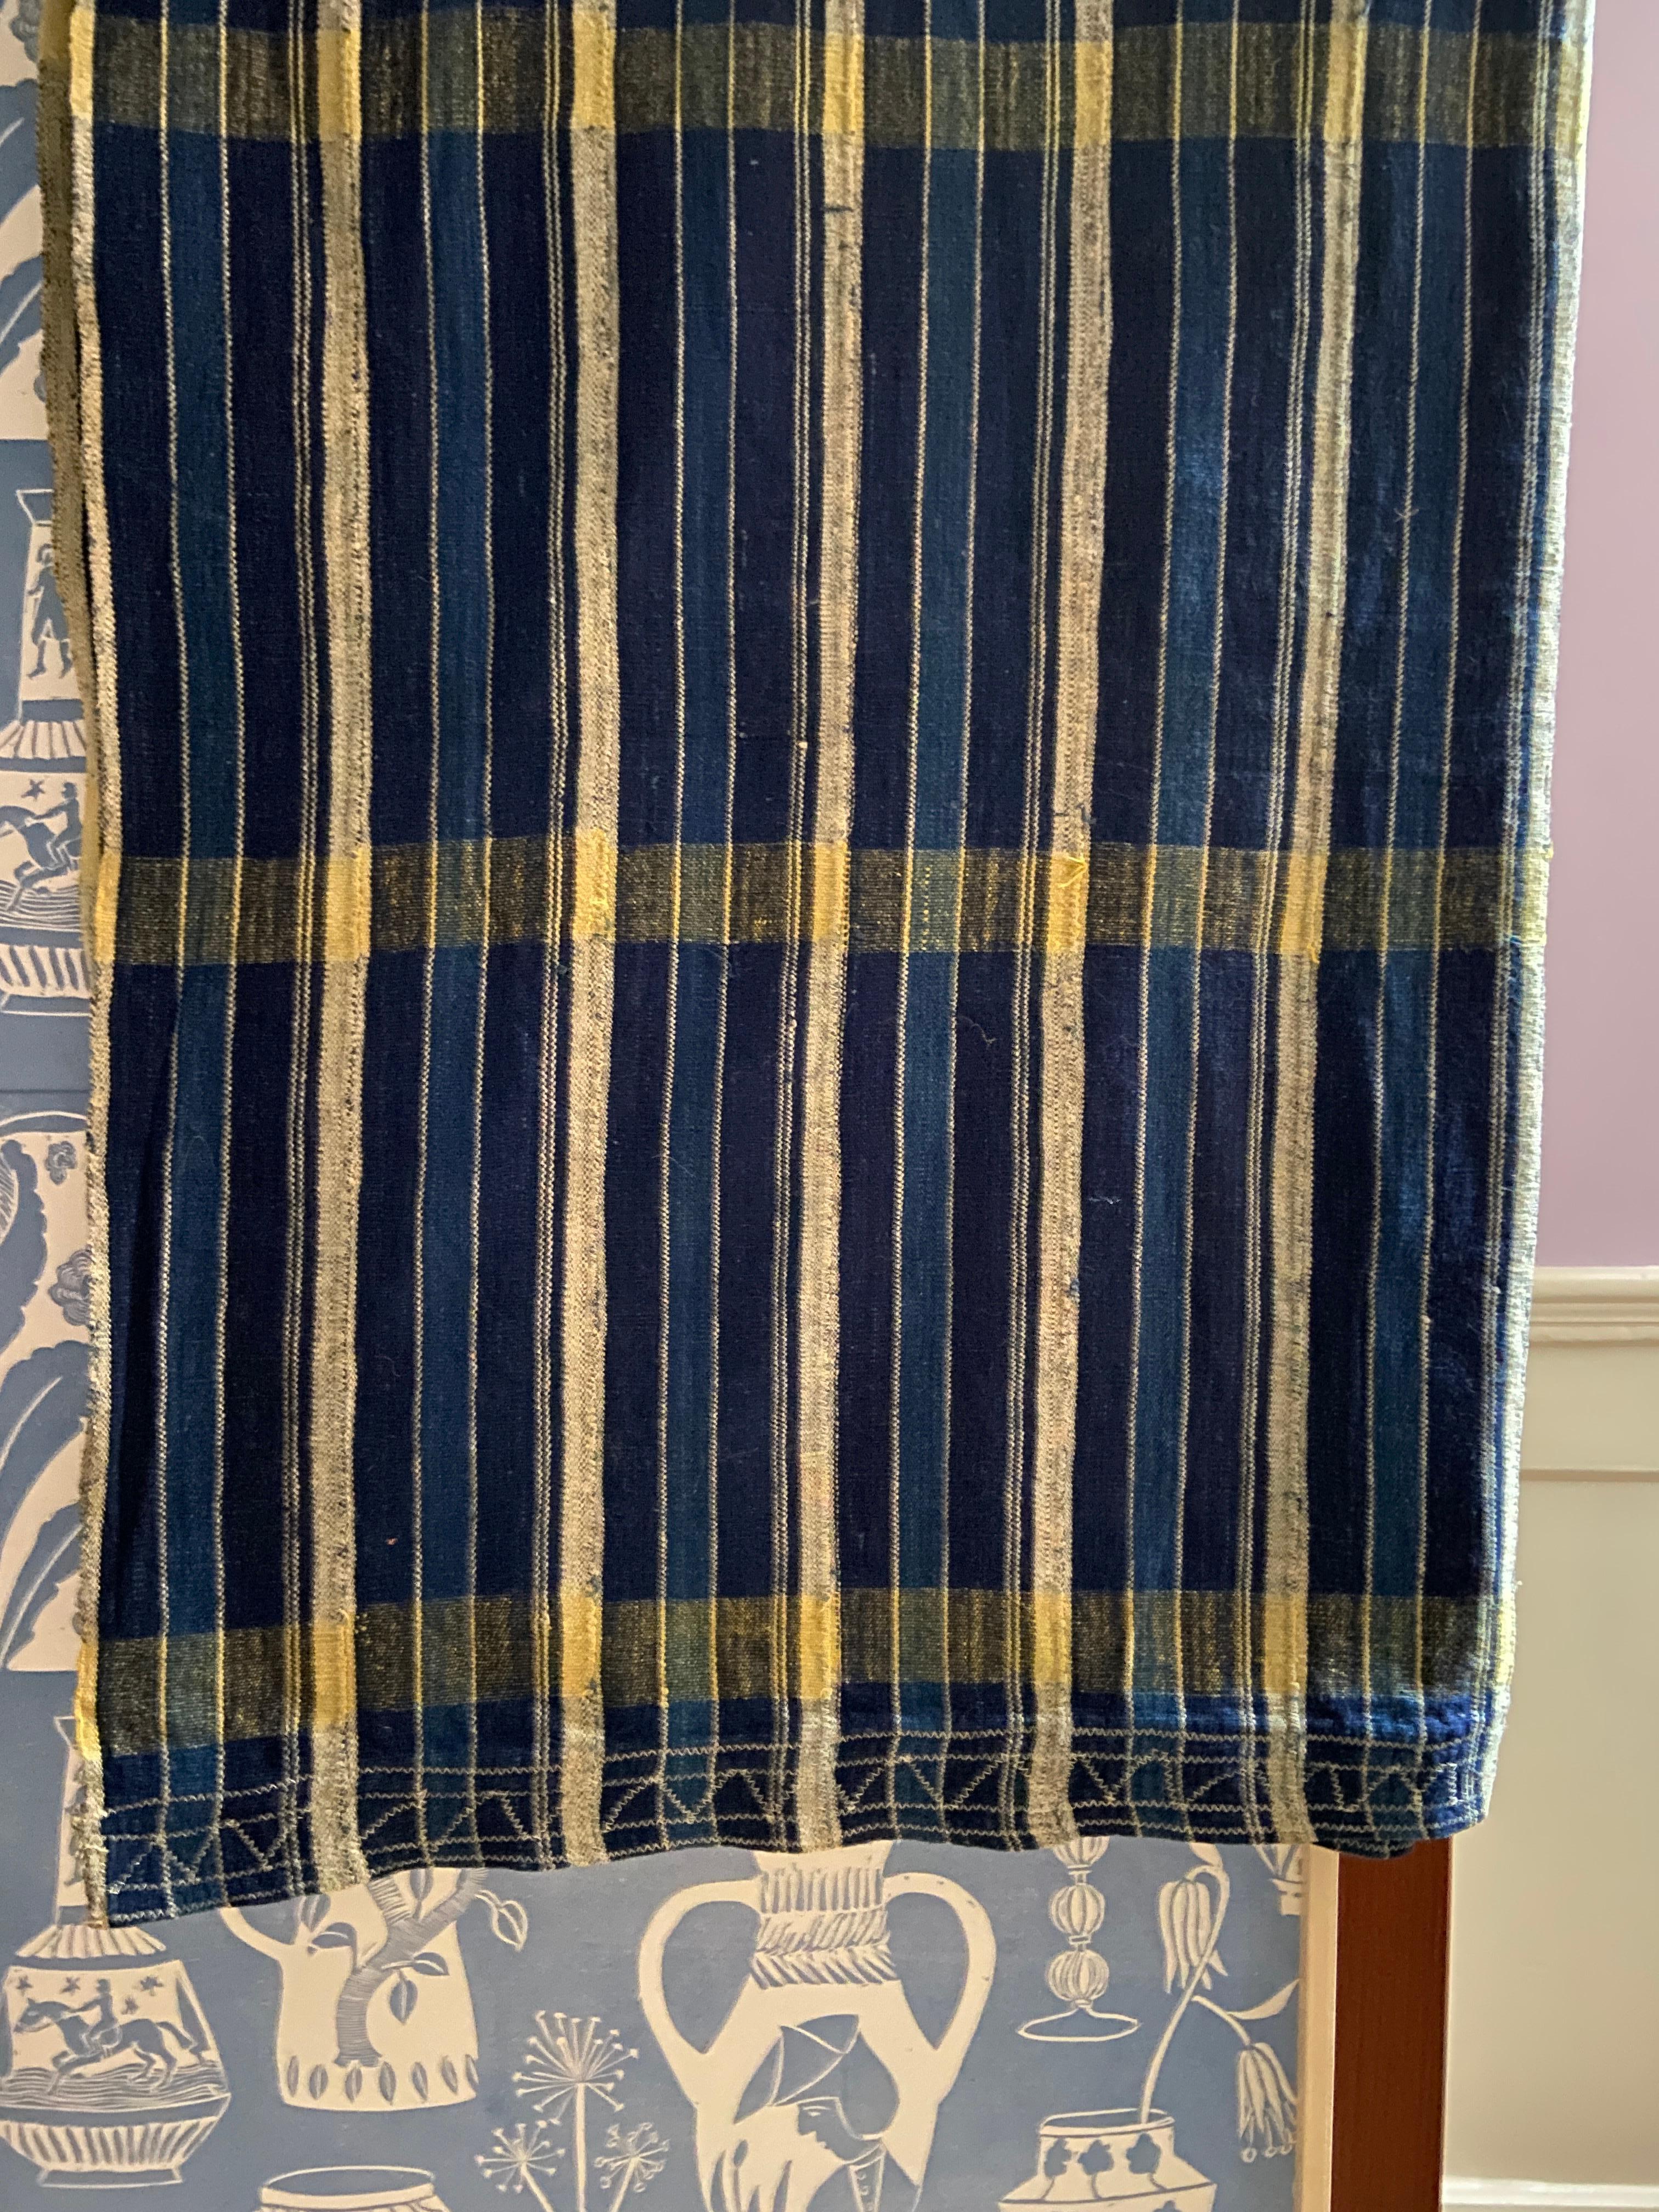 Ivorian Vintage Men's Cloth in Blue and Yellow Stripes, Ivory Coast, 20th Century For Sale